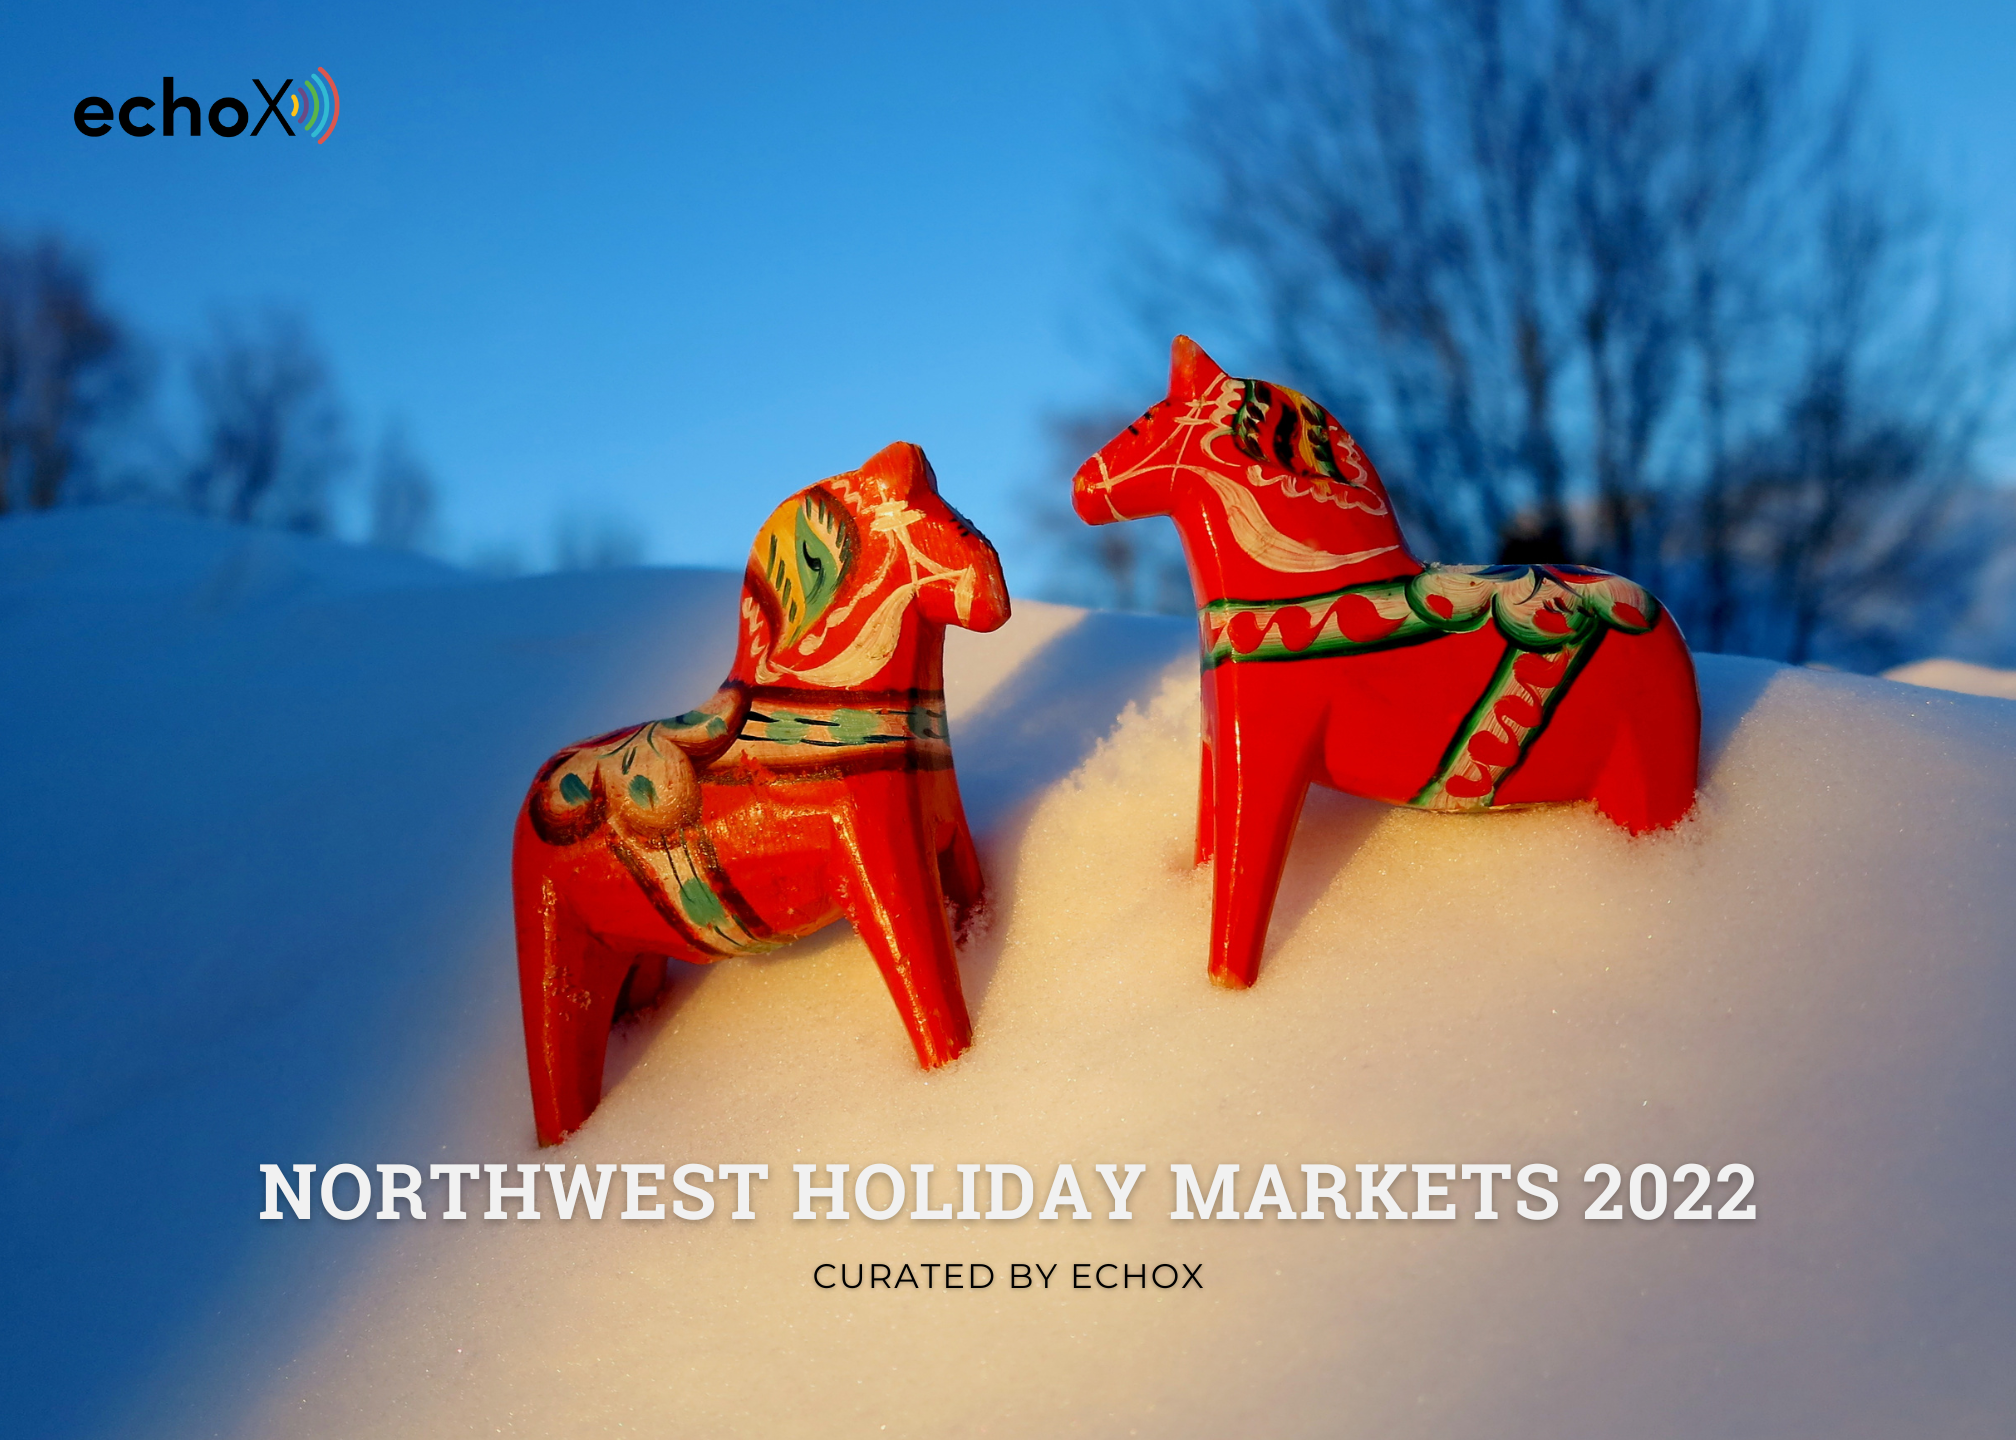 Two Dala horses stand on a mound of snow against a night sky.